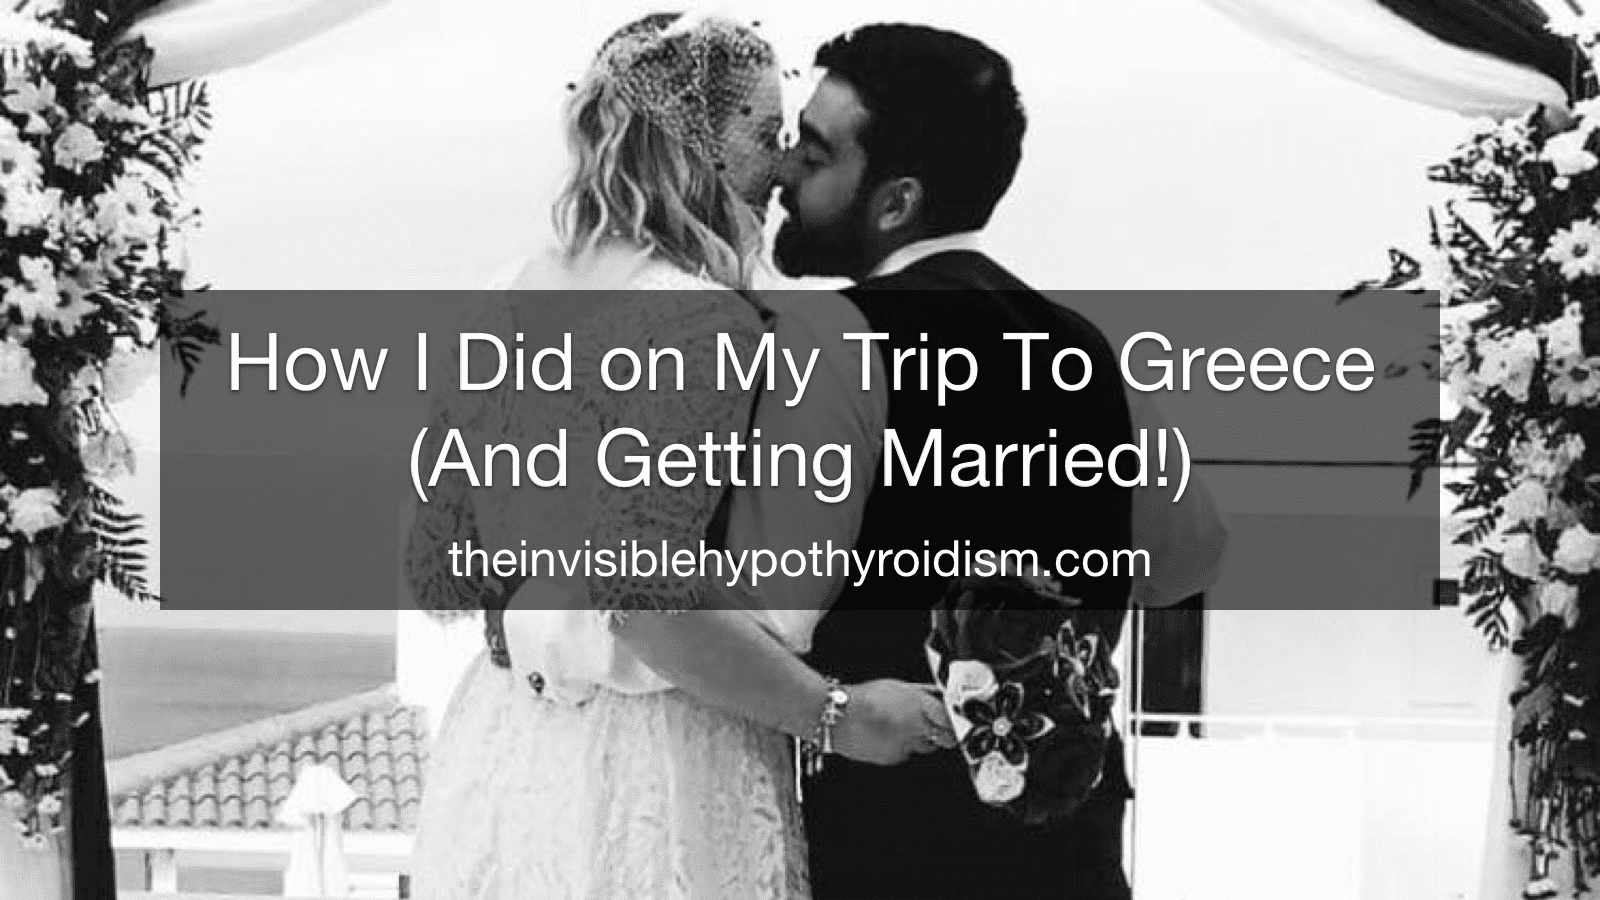 How I Did on My Trip To Greece (And Getting Married!)